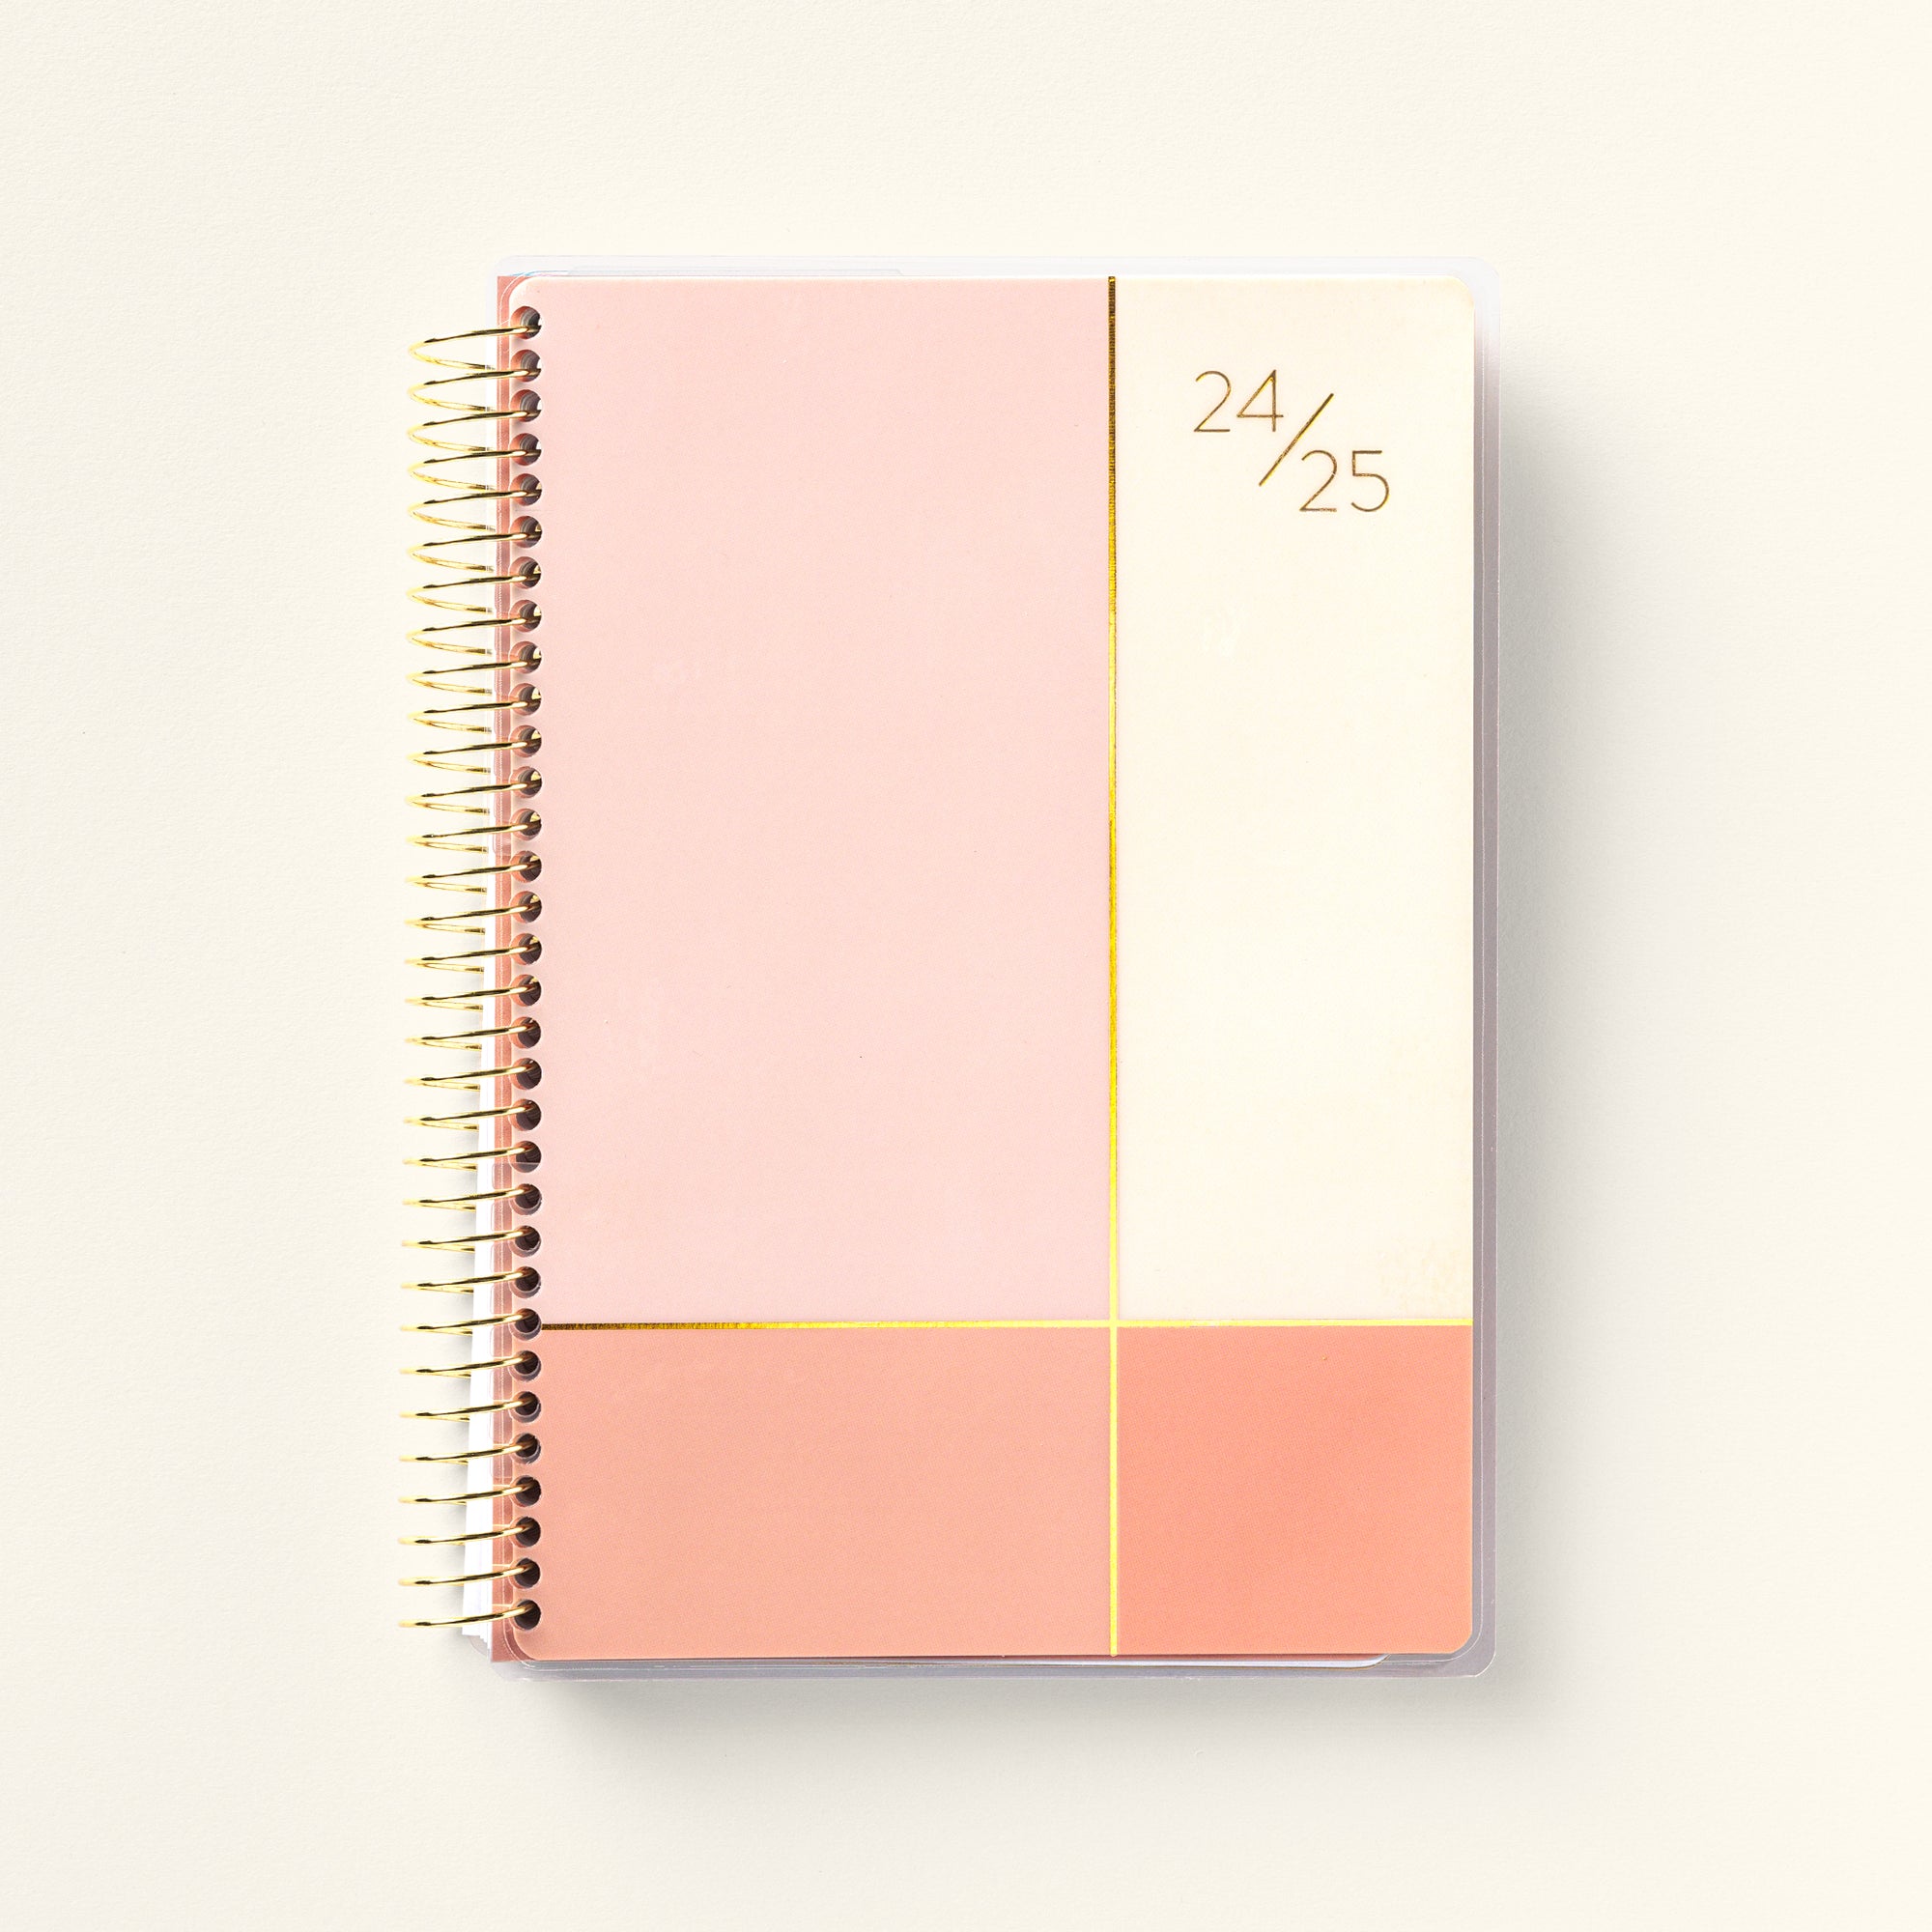 Student planner, pink and blue